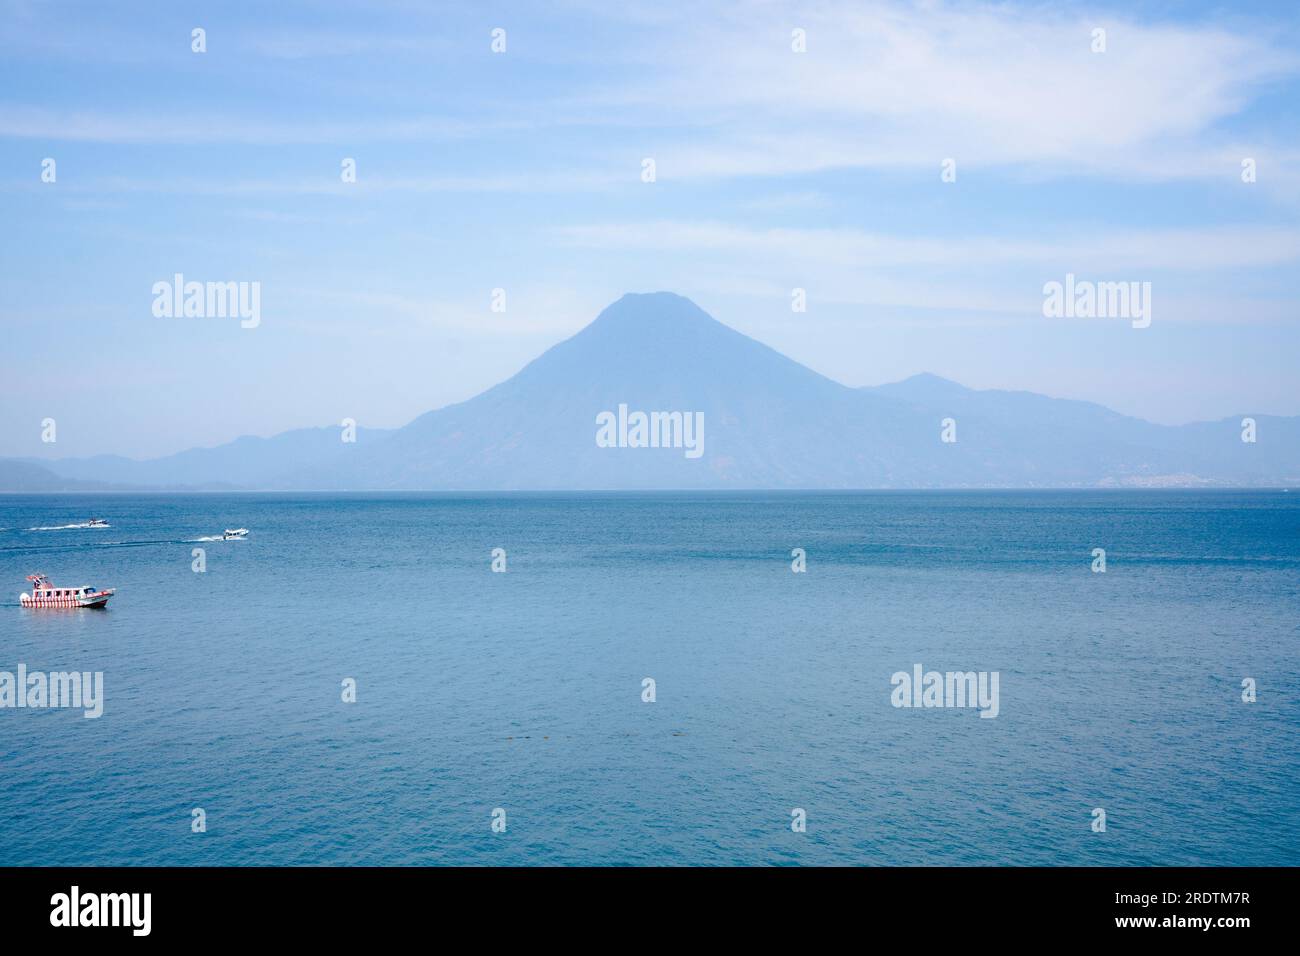 View of boats and volcano in the distance seen from the Lake Atitlan surface in Guatemala Stock Photo